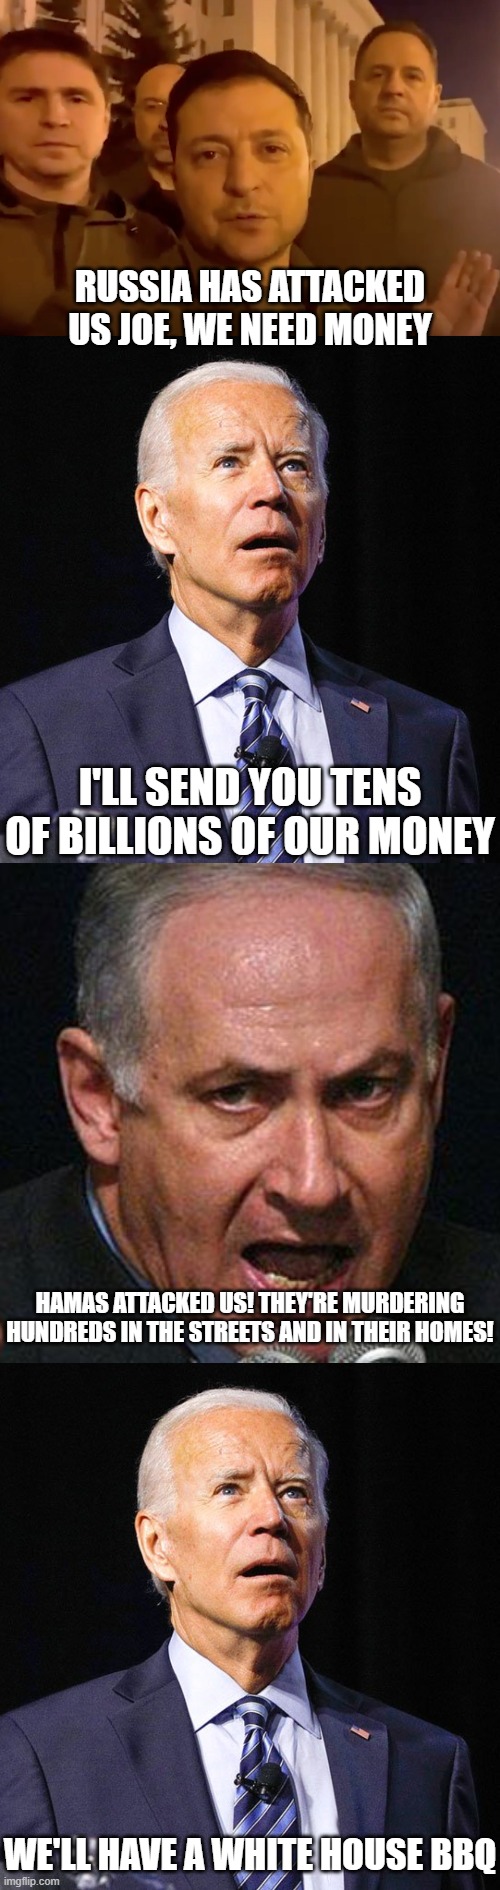 This administration is a pathetic joke. | RUSSIA HAS ATTACKED US JOE, WE NEED MONEY; I'LL SEND YOU TENS OF BILLIONS OF OUR MONEY; HAMAS ATTACKED US! THEY'RE MURDERING HUNDREDS IN THE STREETS AND IN THEIR HOMES! WE'LL HAVE A WHITE HOUSE BBQ | image tagged in zelensky,joe biden,netenyahu,anti semites | made w/ Imgflip meme maker